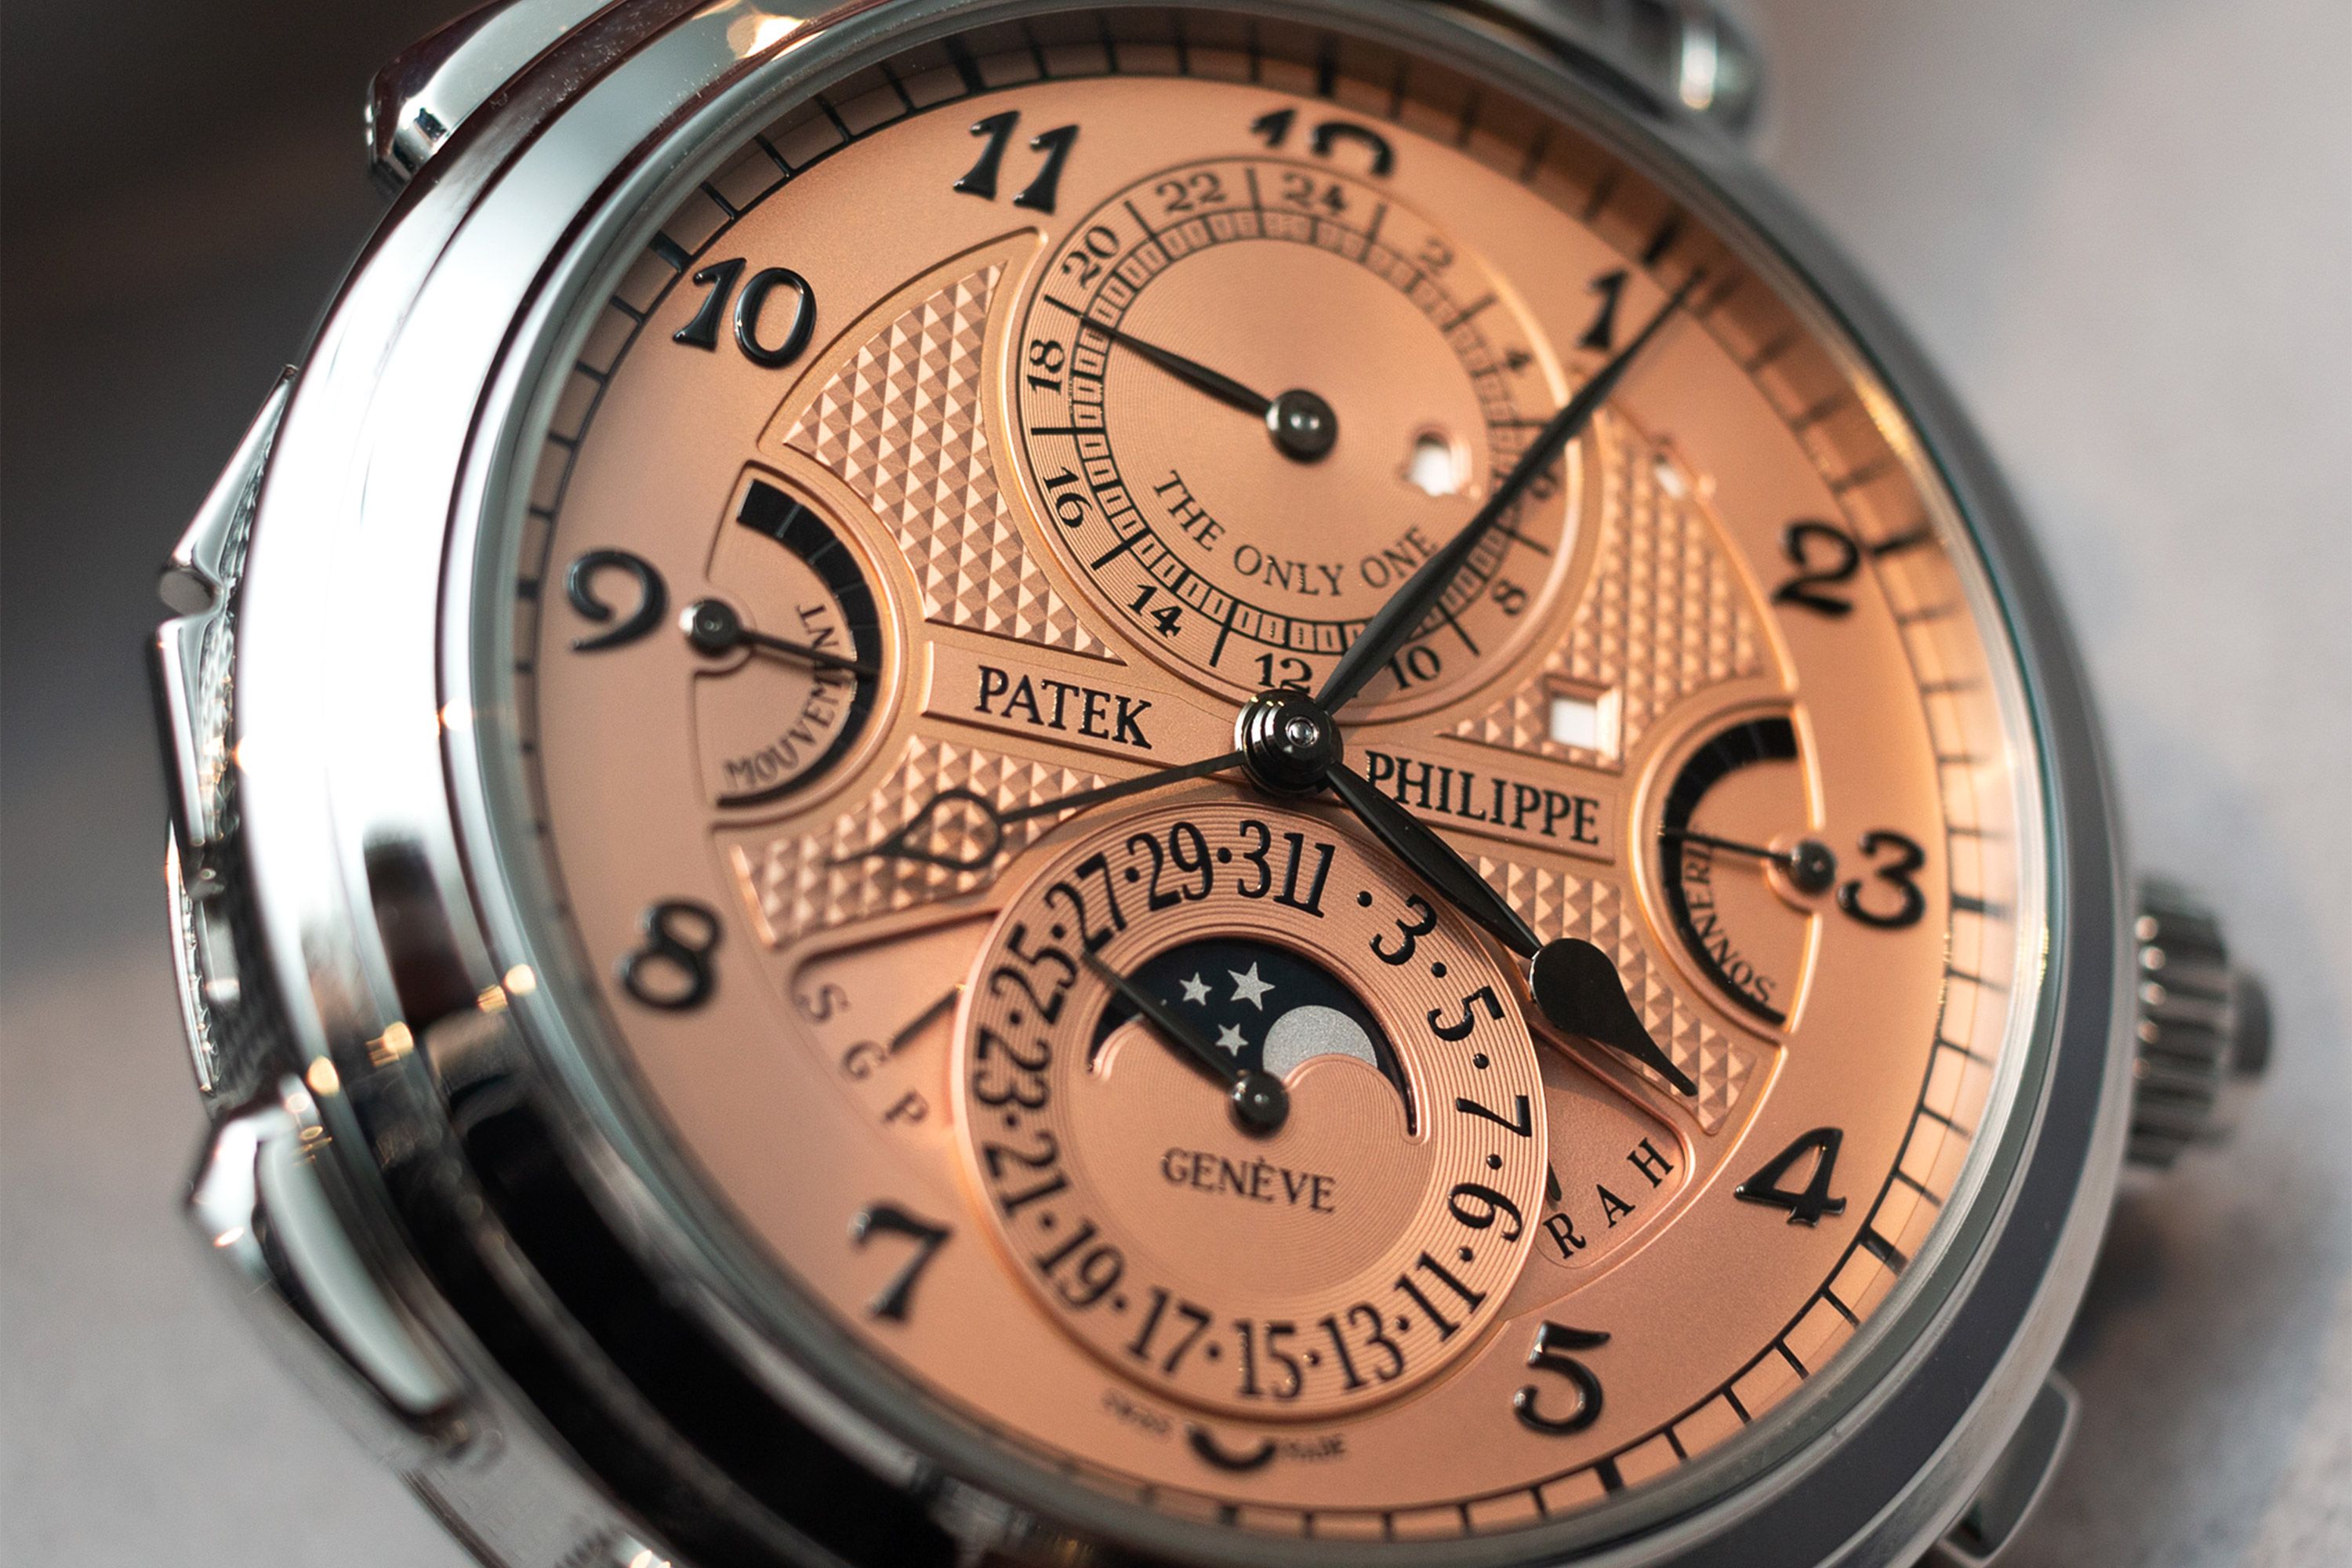 5 Most Expensive Watches in the World You'd Love to Buy